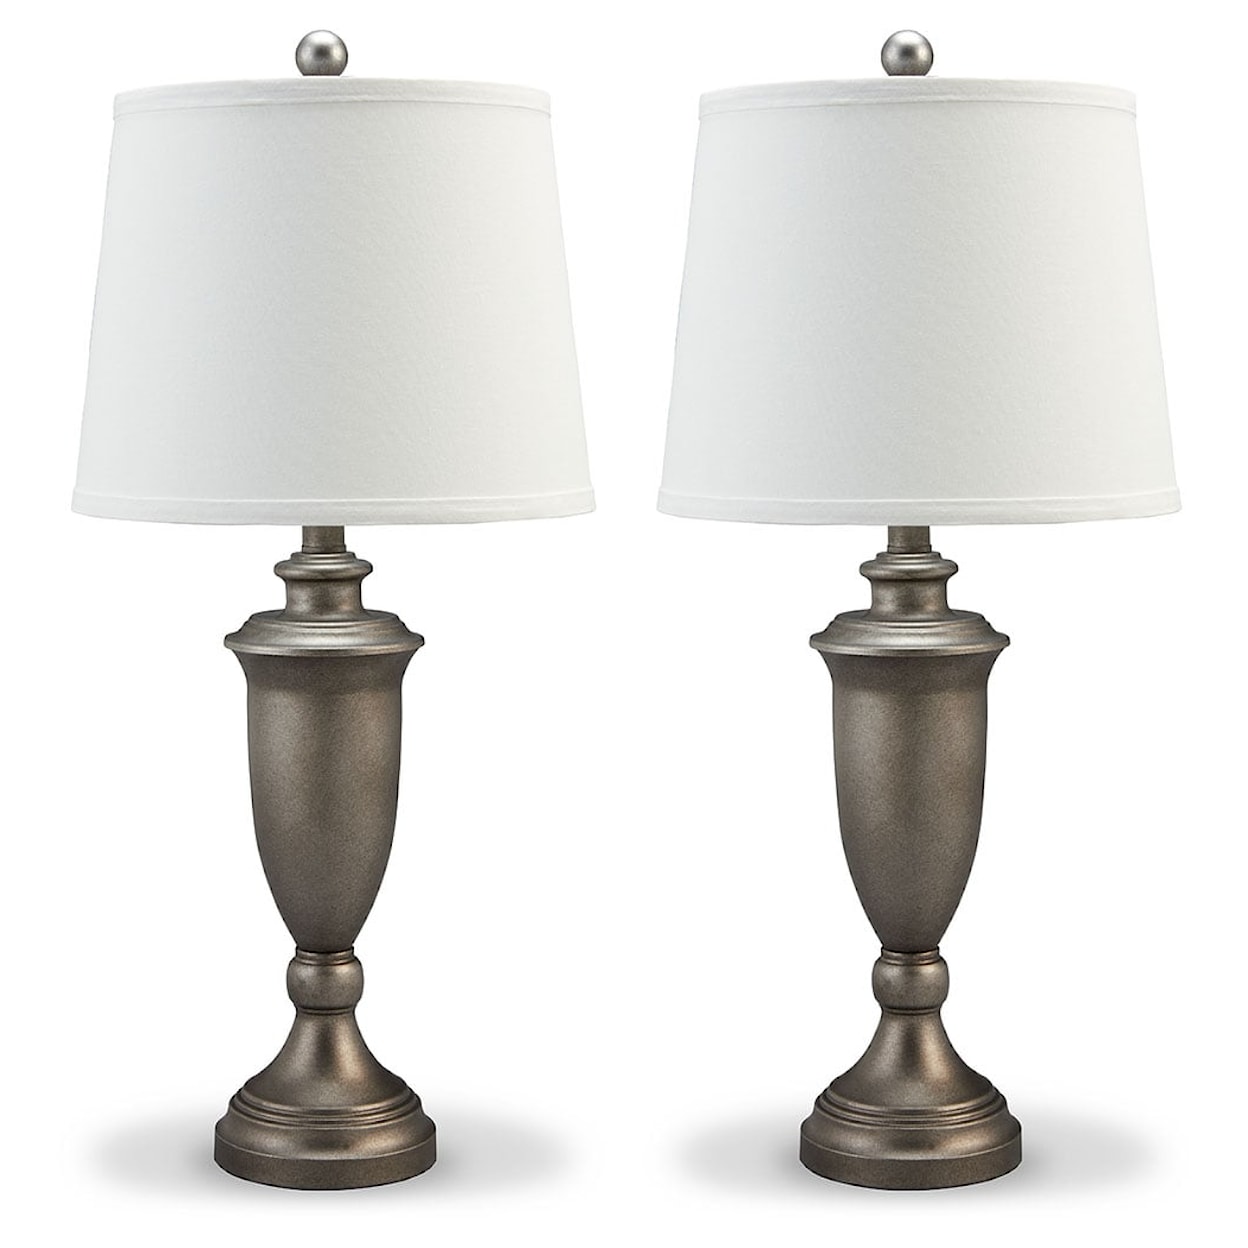 Benchcraft Lamps - Traditional Classics Doraley Table Lamp (Set of 2)